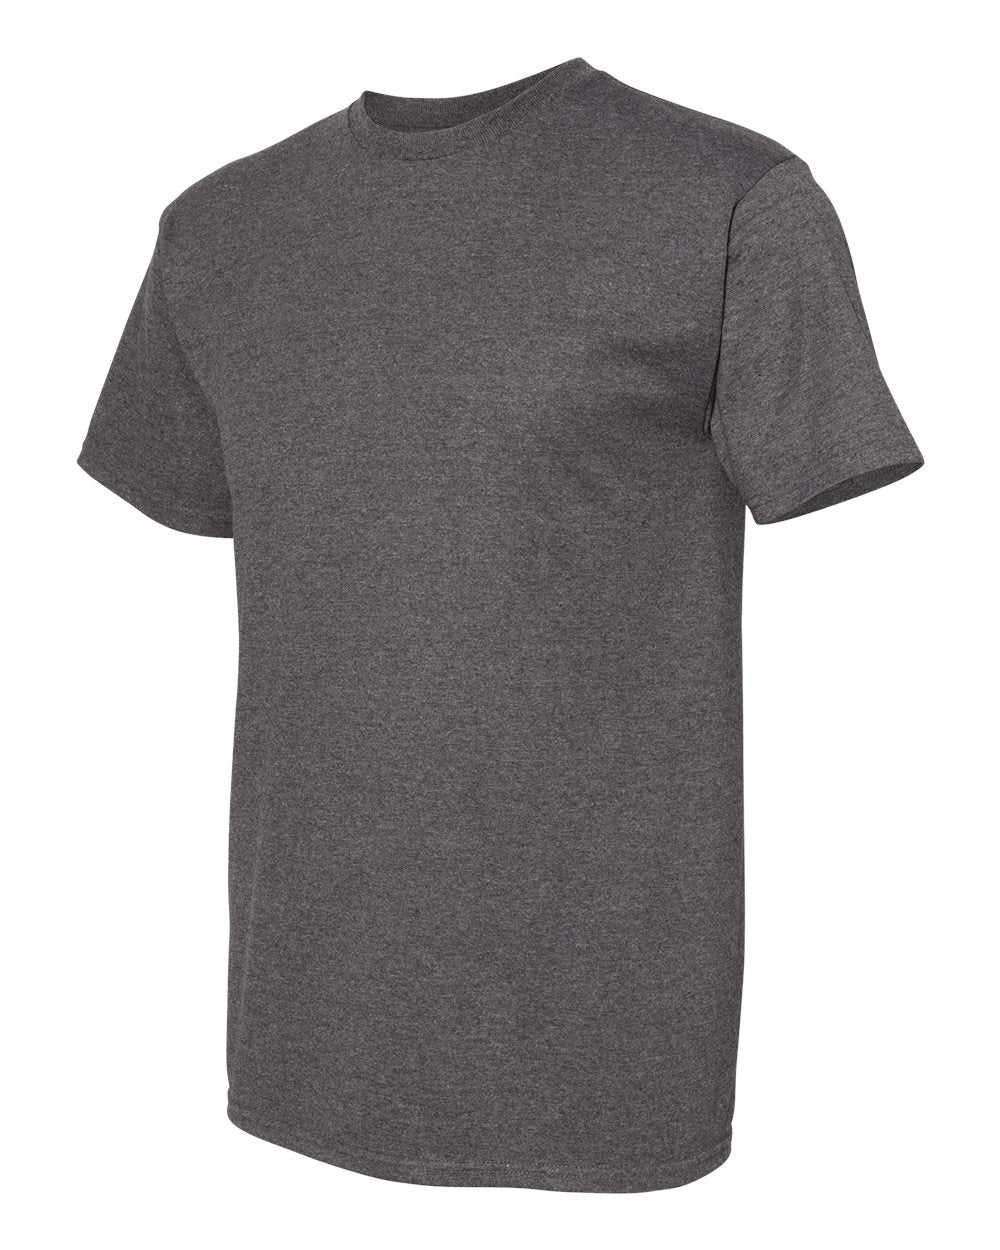 American Apparel 1701 Midweight Cotton Unisex T-Shirt - Charcoal Heather - HIT a Double